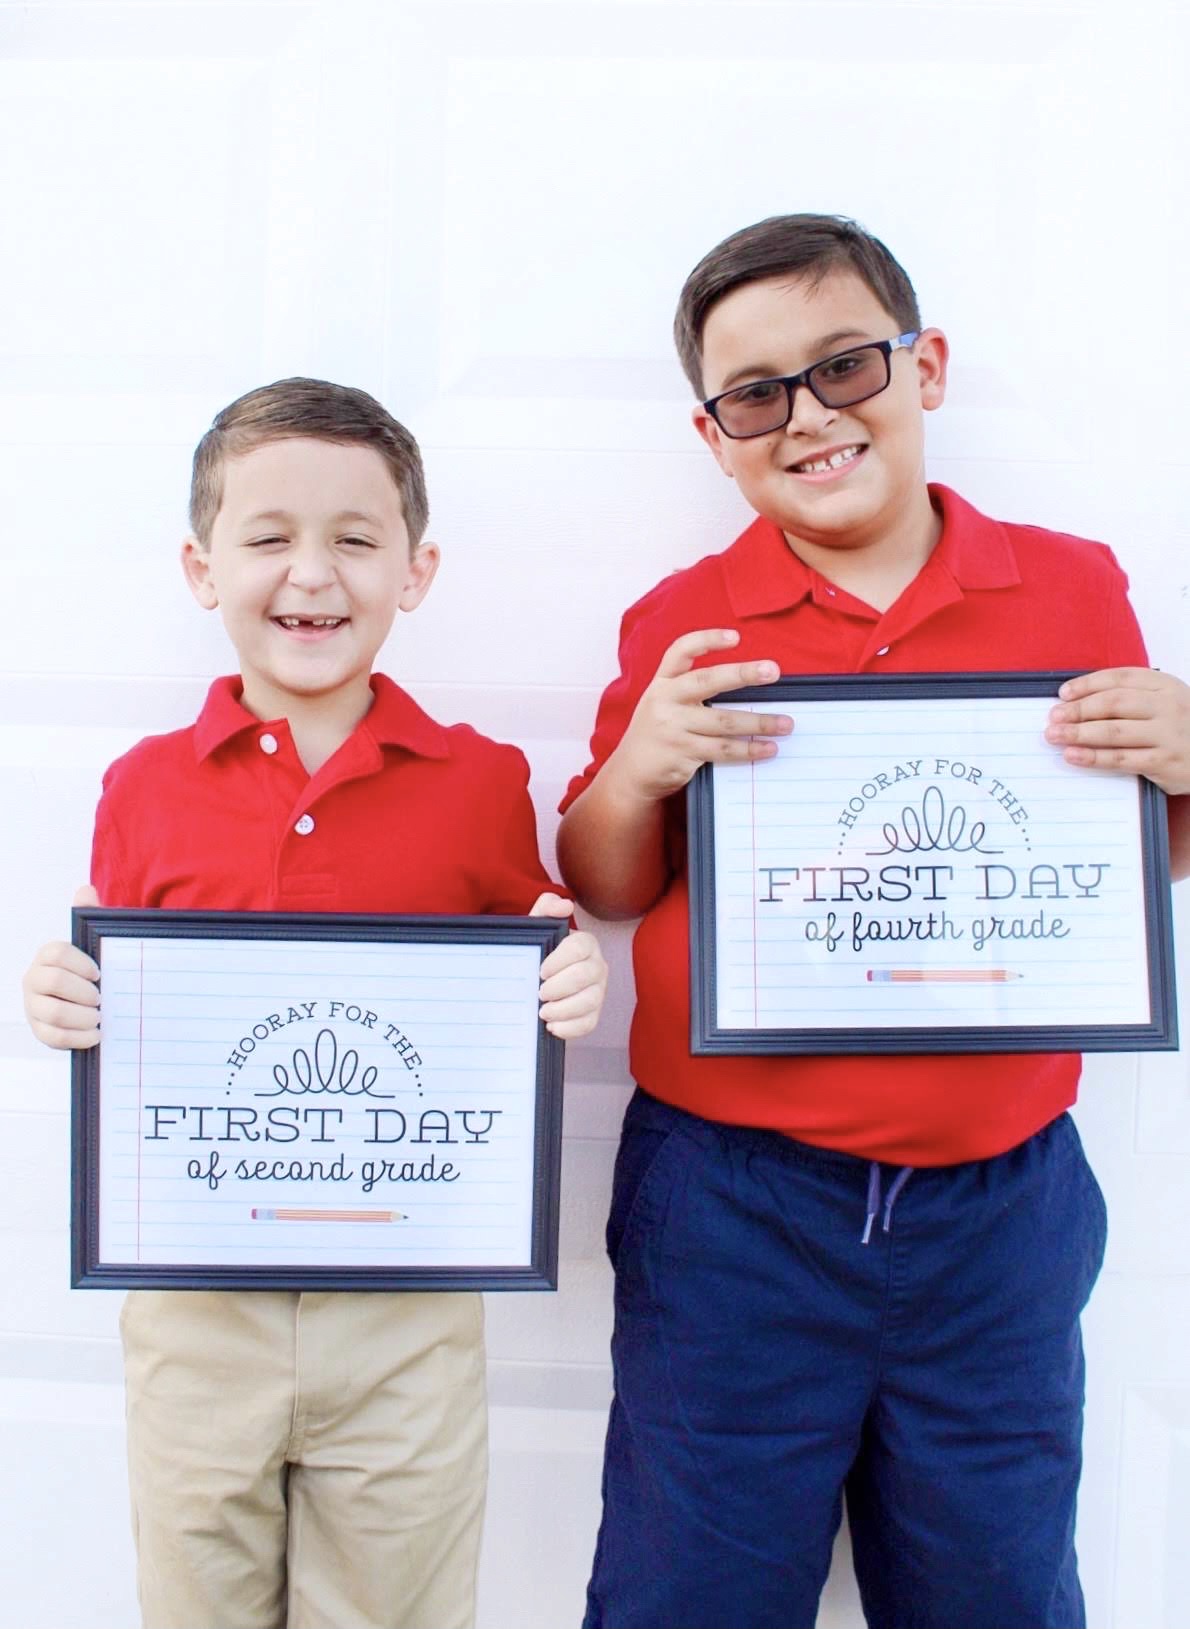 boys holding first day of school sign